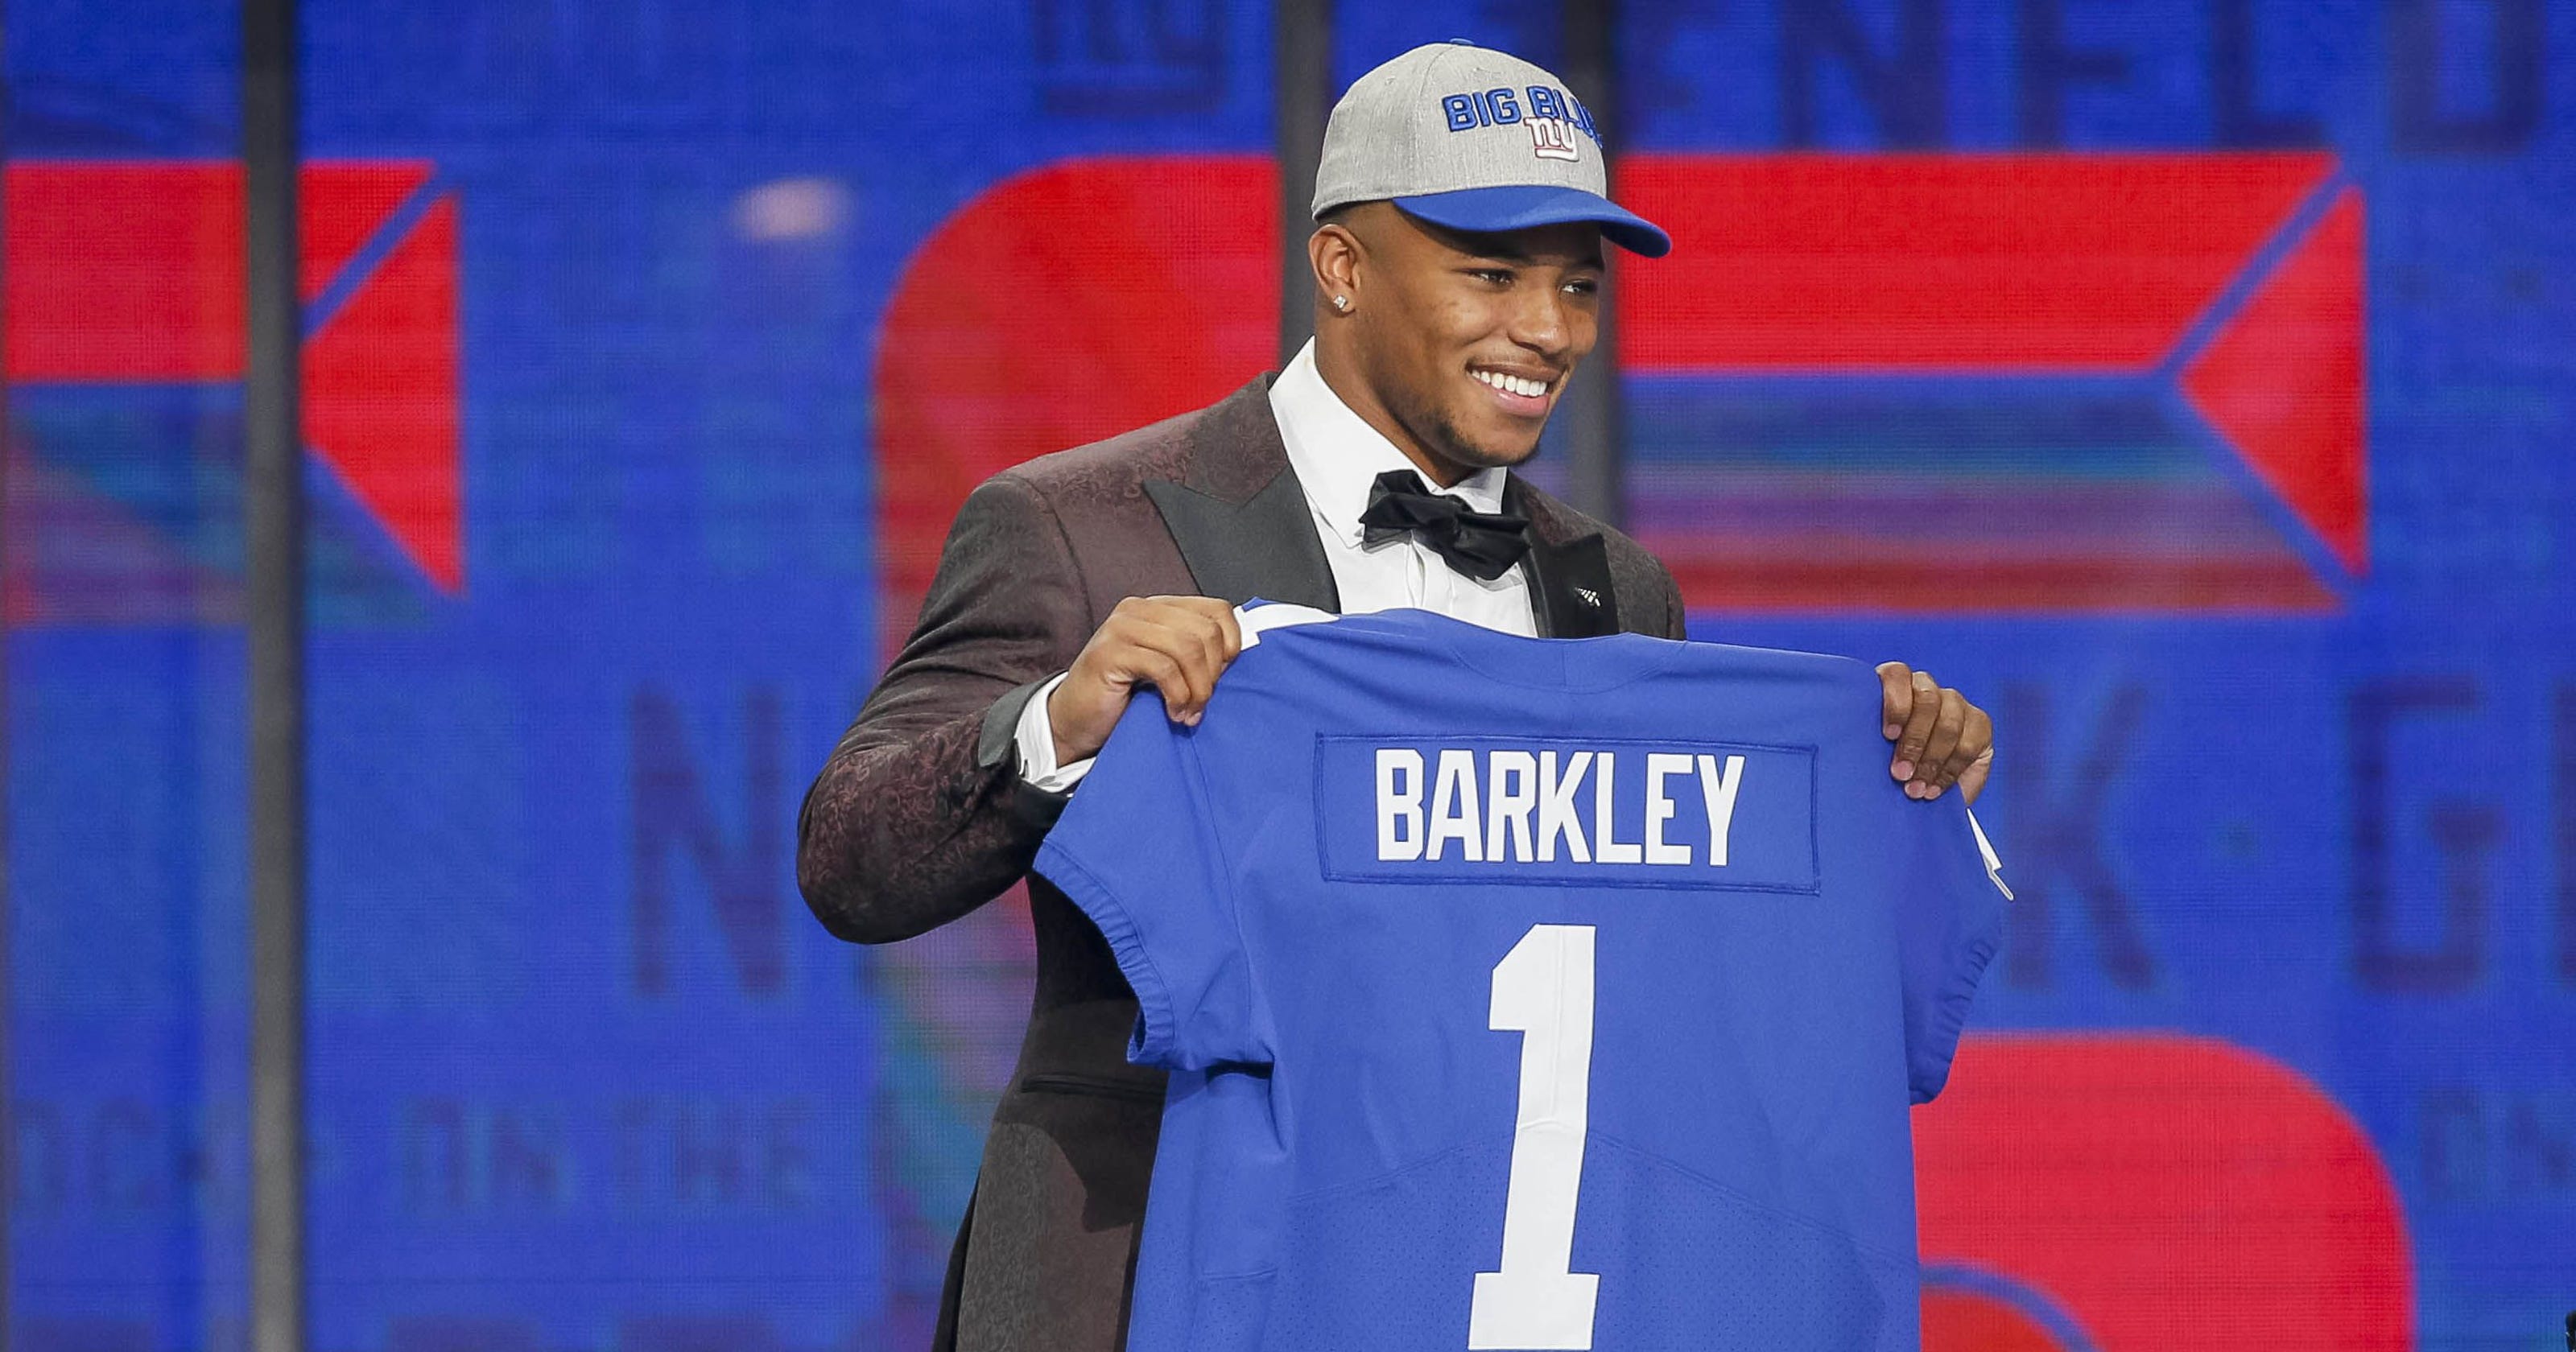 NFL draft 2018: Giants' Saquon Barkley pick shows they're in win-now mode